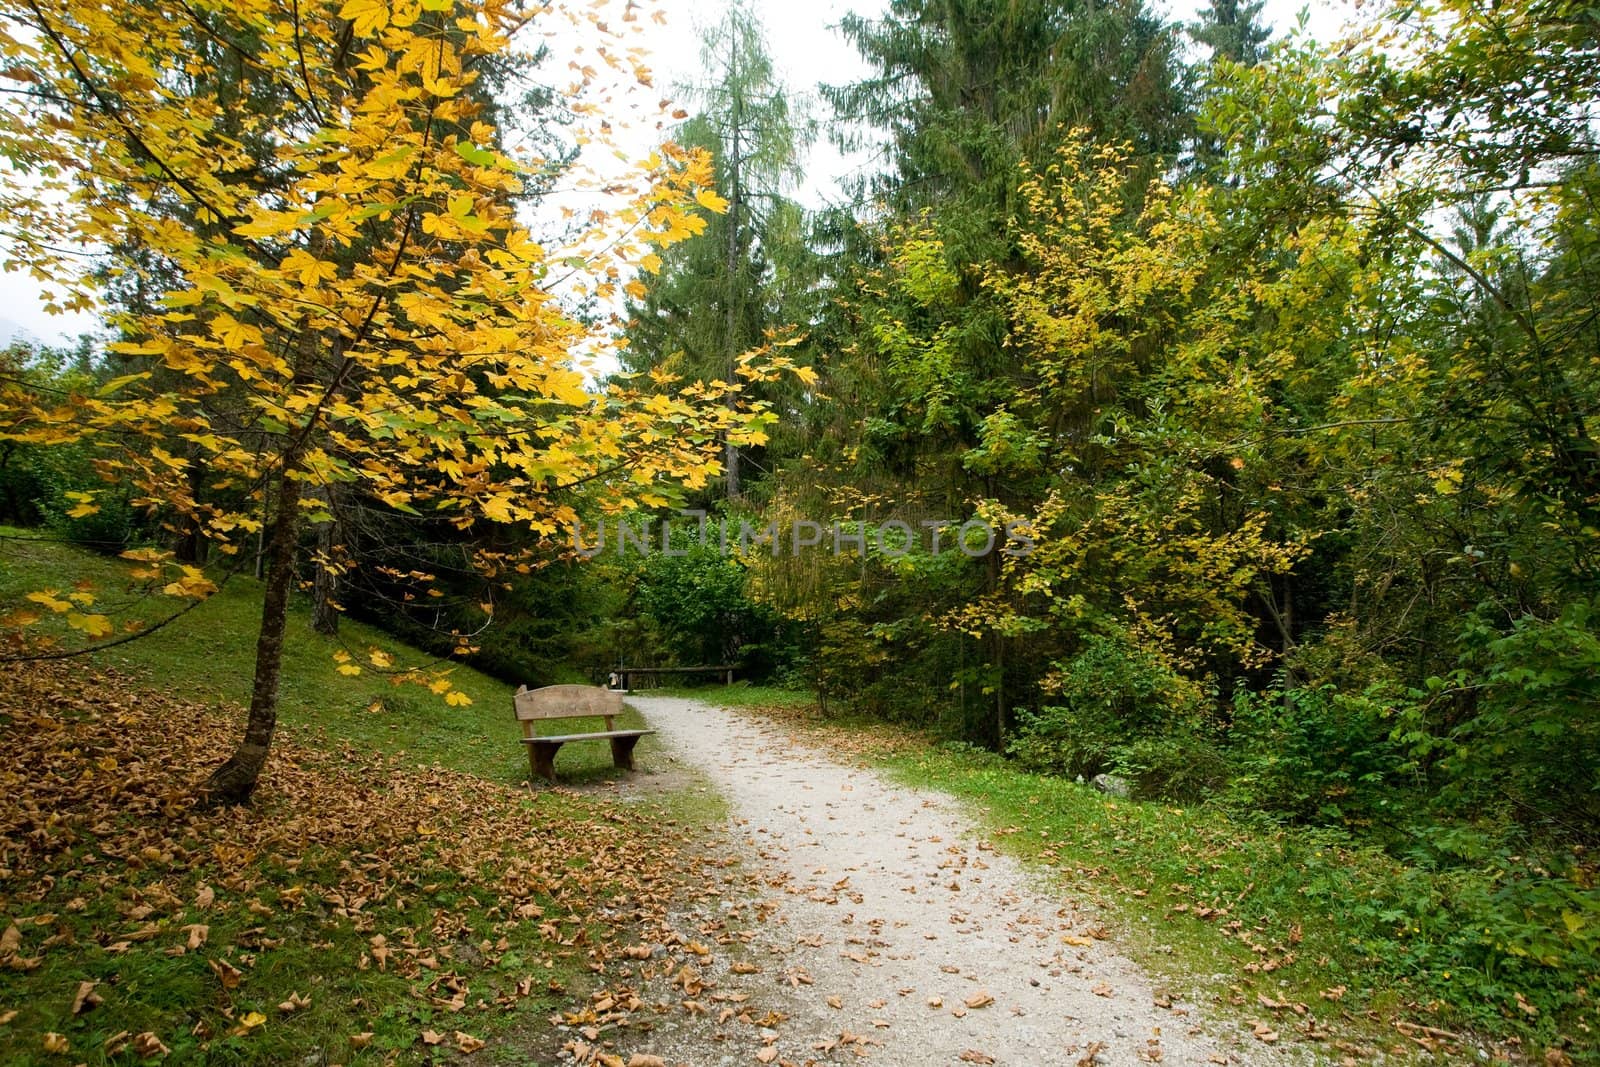 An image of a bench in the park